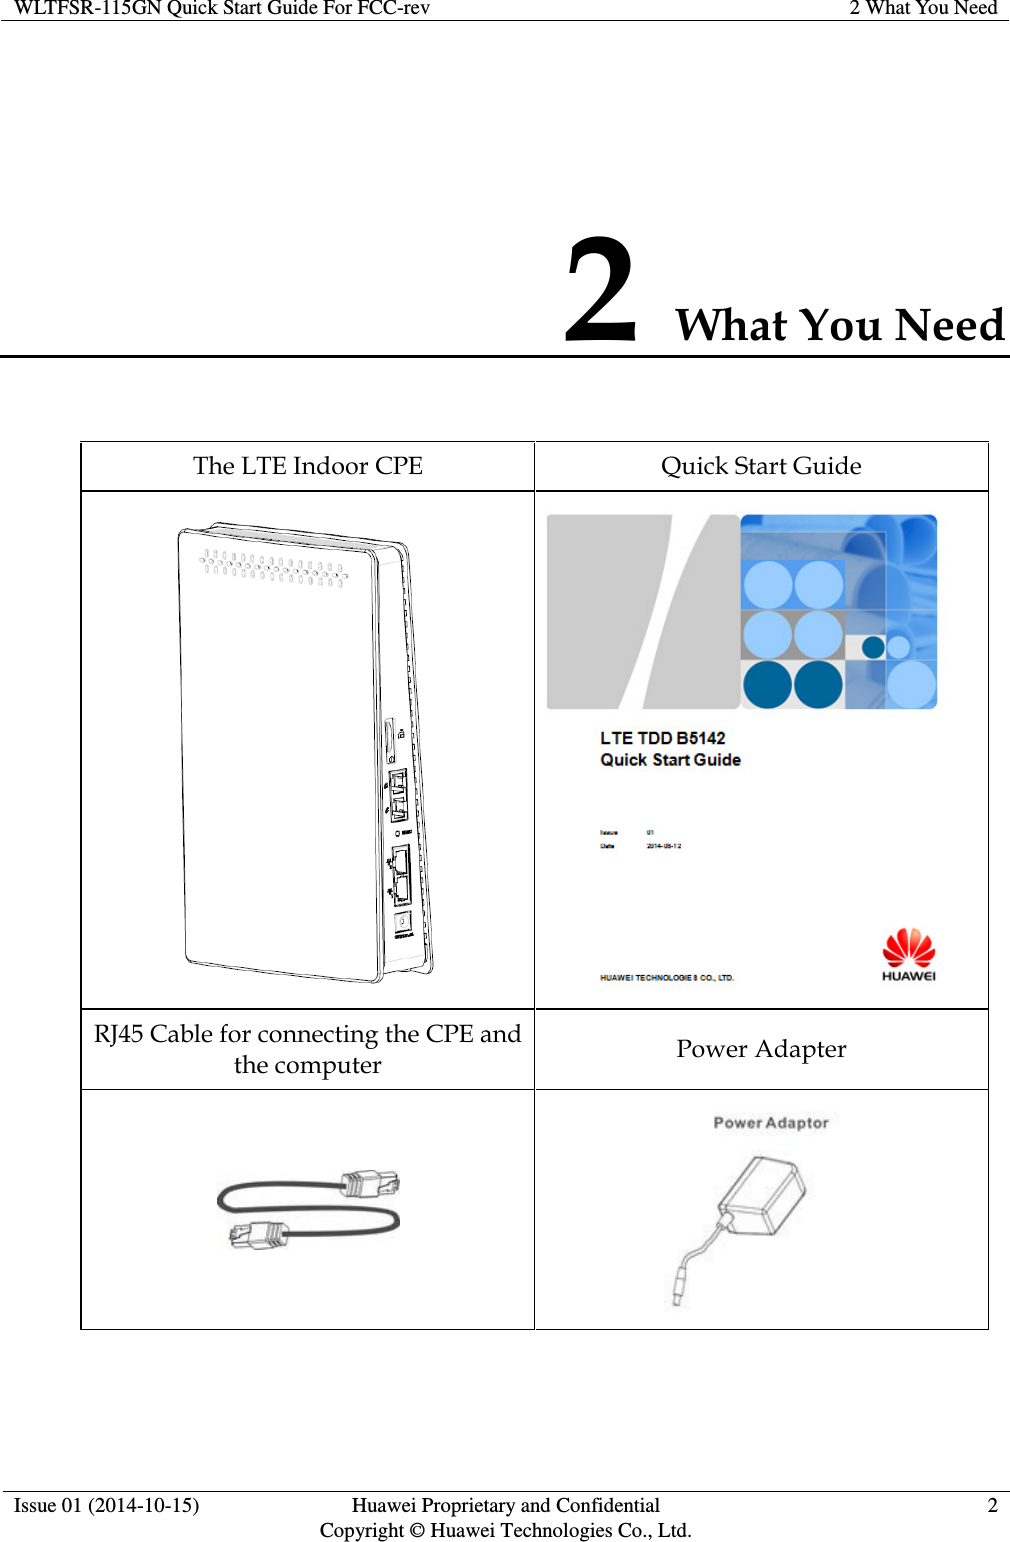 WLTFSR-115GN Quick Start Guide For FCC-rev 2 What You Need  2 What You Need The LTE Indoor CPE Quick Start Guide     RJ45 Cable for connecting the CPE and the computer Power Adapter   Issue 01 (2014-10-15)  Huawei Proprietary and Confidential                   Copyright © Huawei Technologies Co., Ltd. 2  